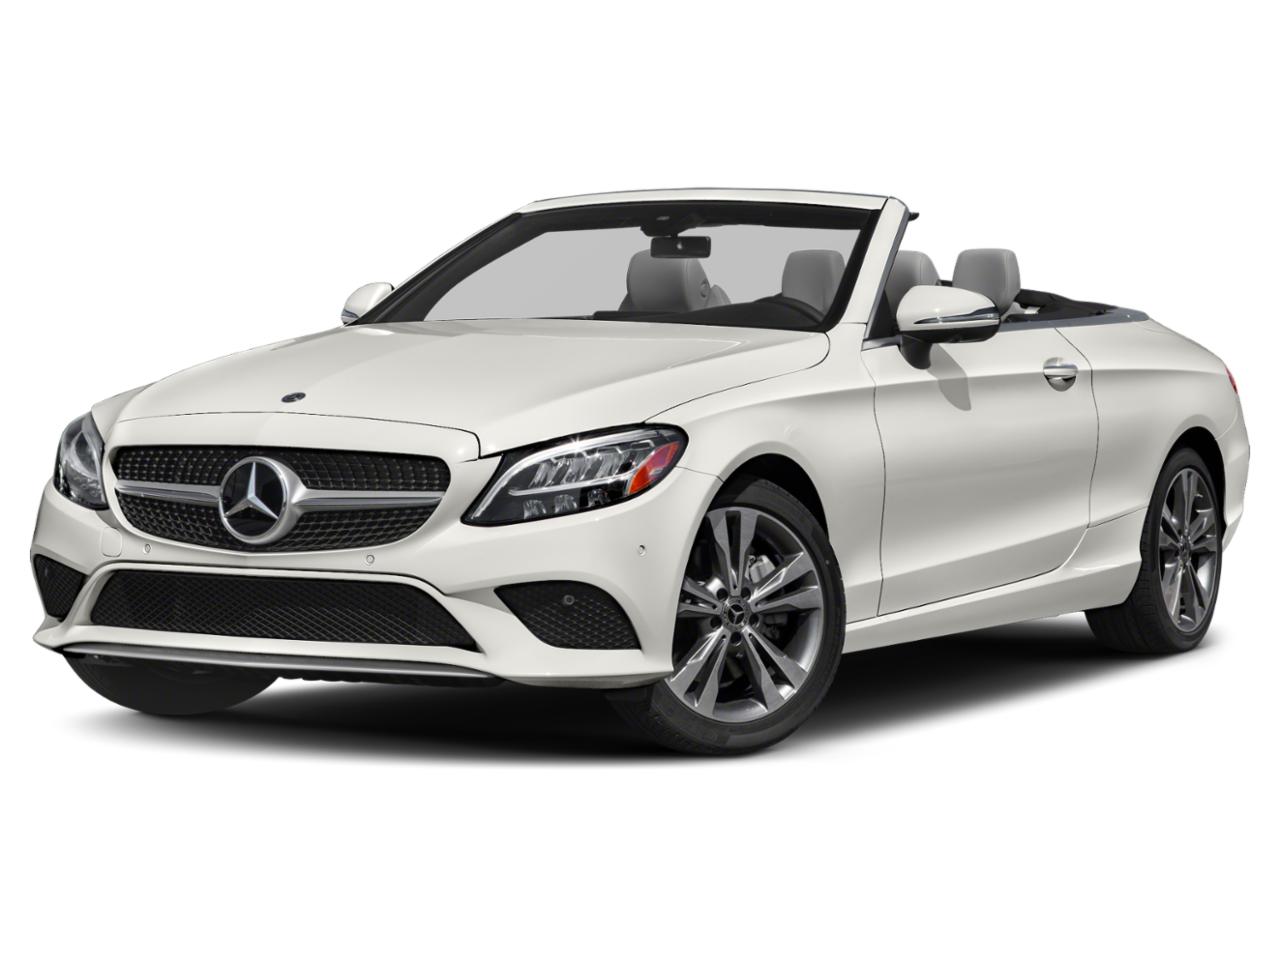 2019 Mercedes-Benz C-Class Vehicle Photo in Saint Charles, IL 60174